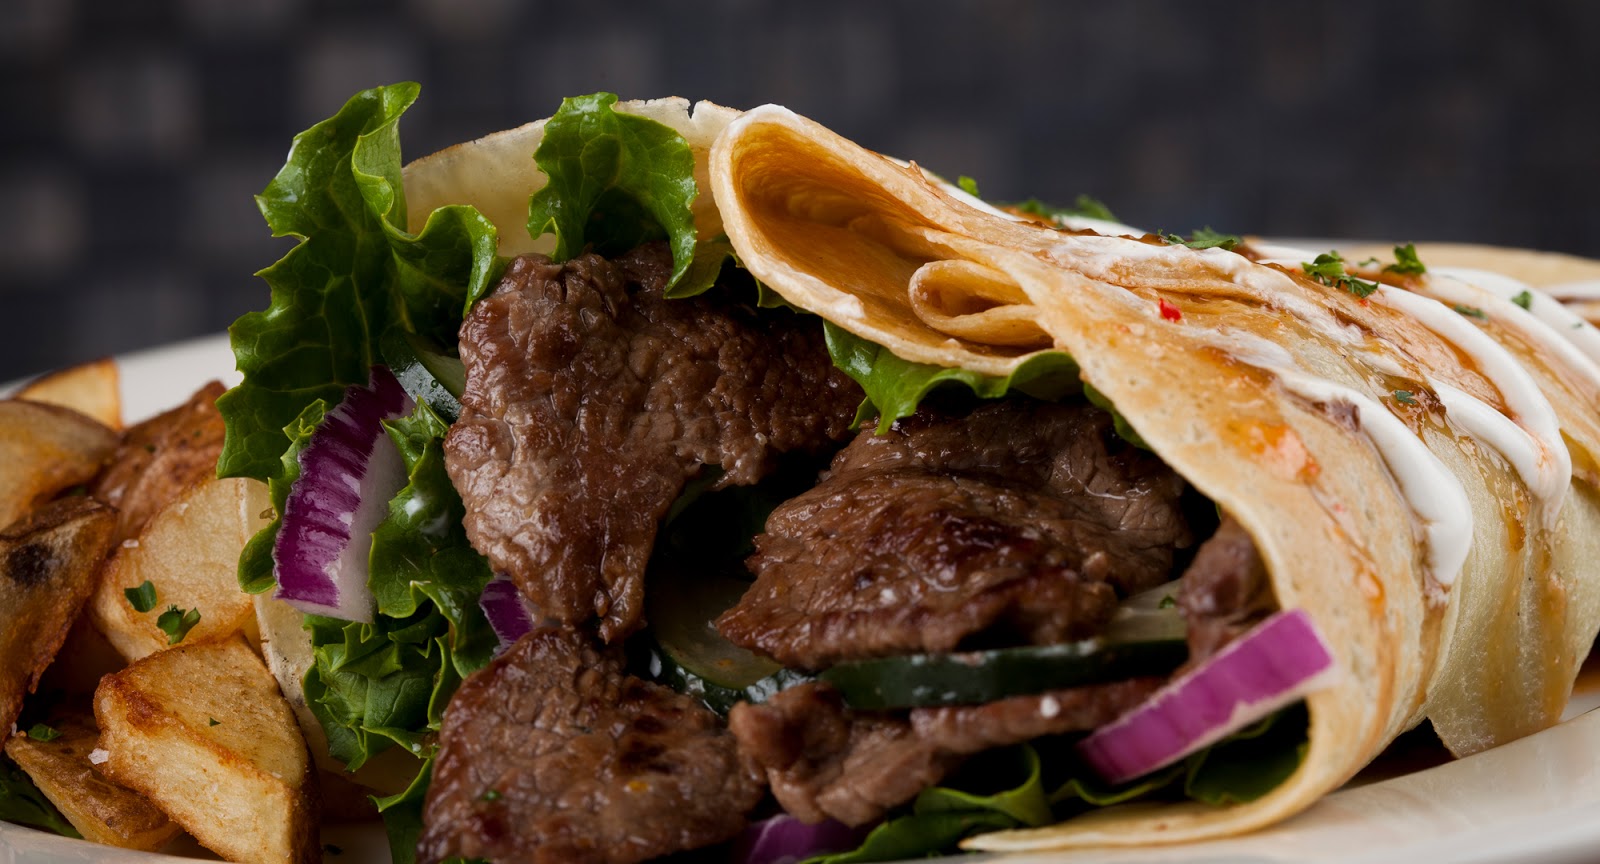 Asian style wrap with beef